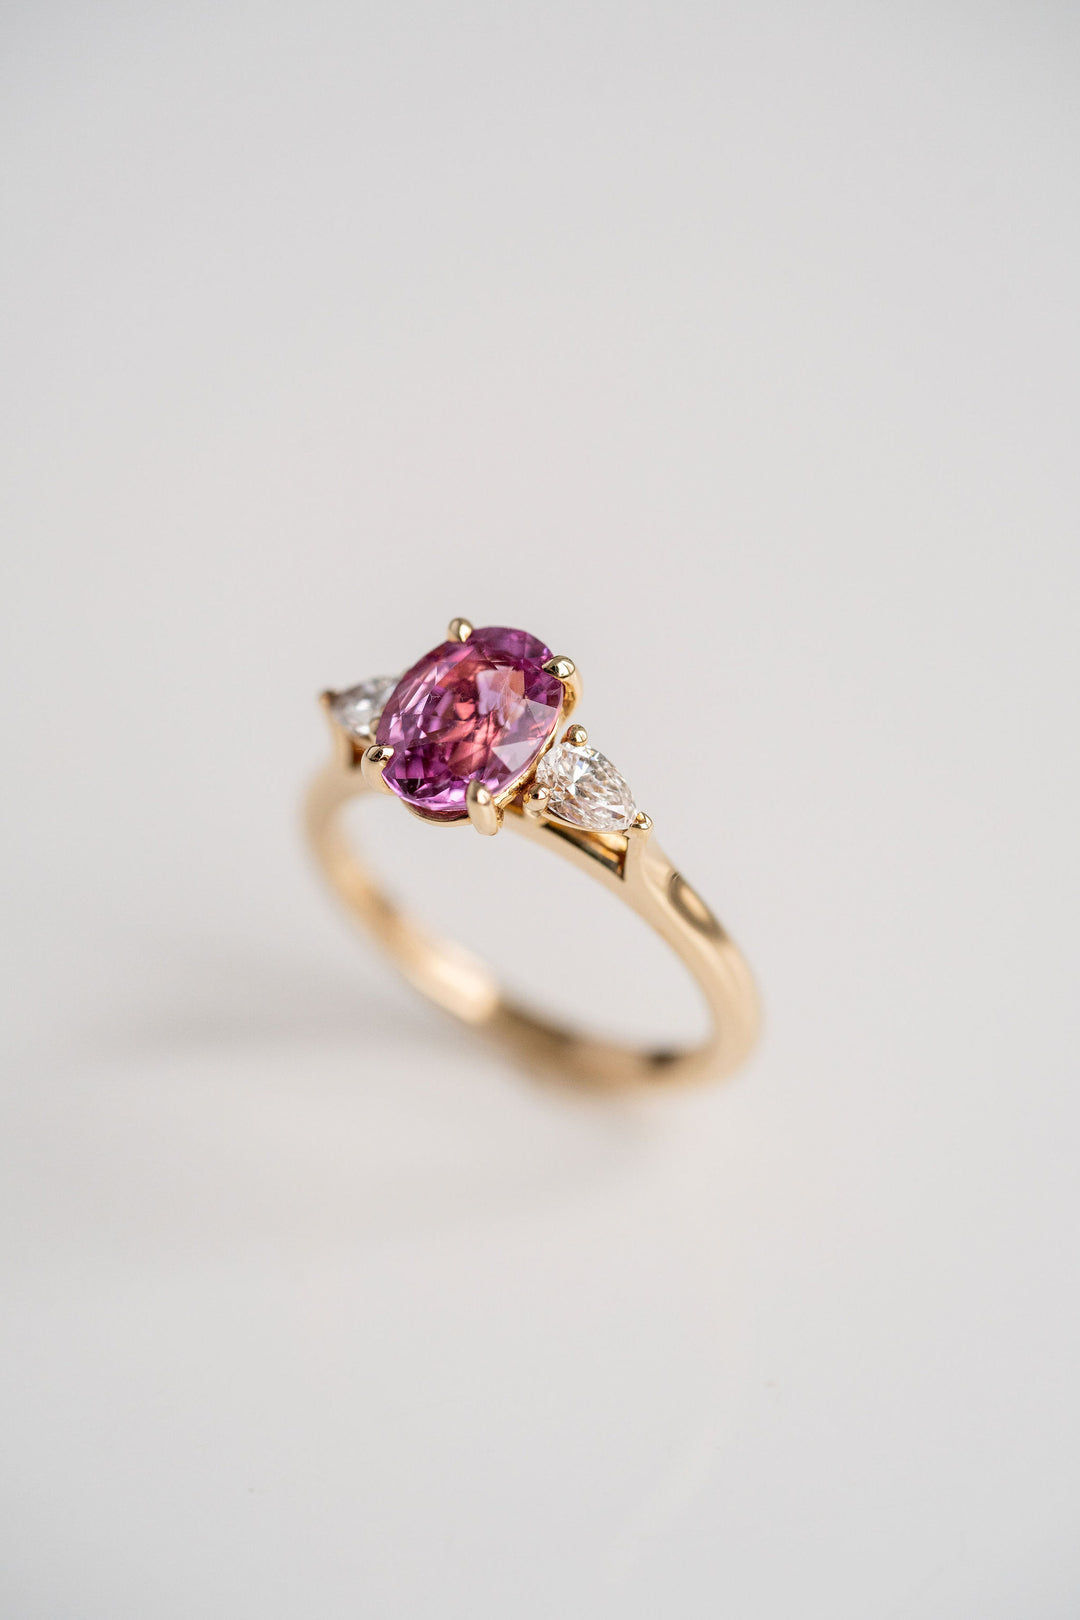 2.18ct. Vivid Pink Oval Sri Lankan Sapphire With Pear Shape Diamond Accents, 14k Yellow Gold